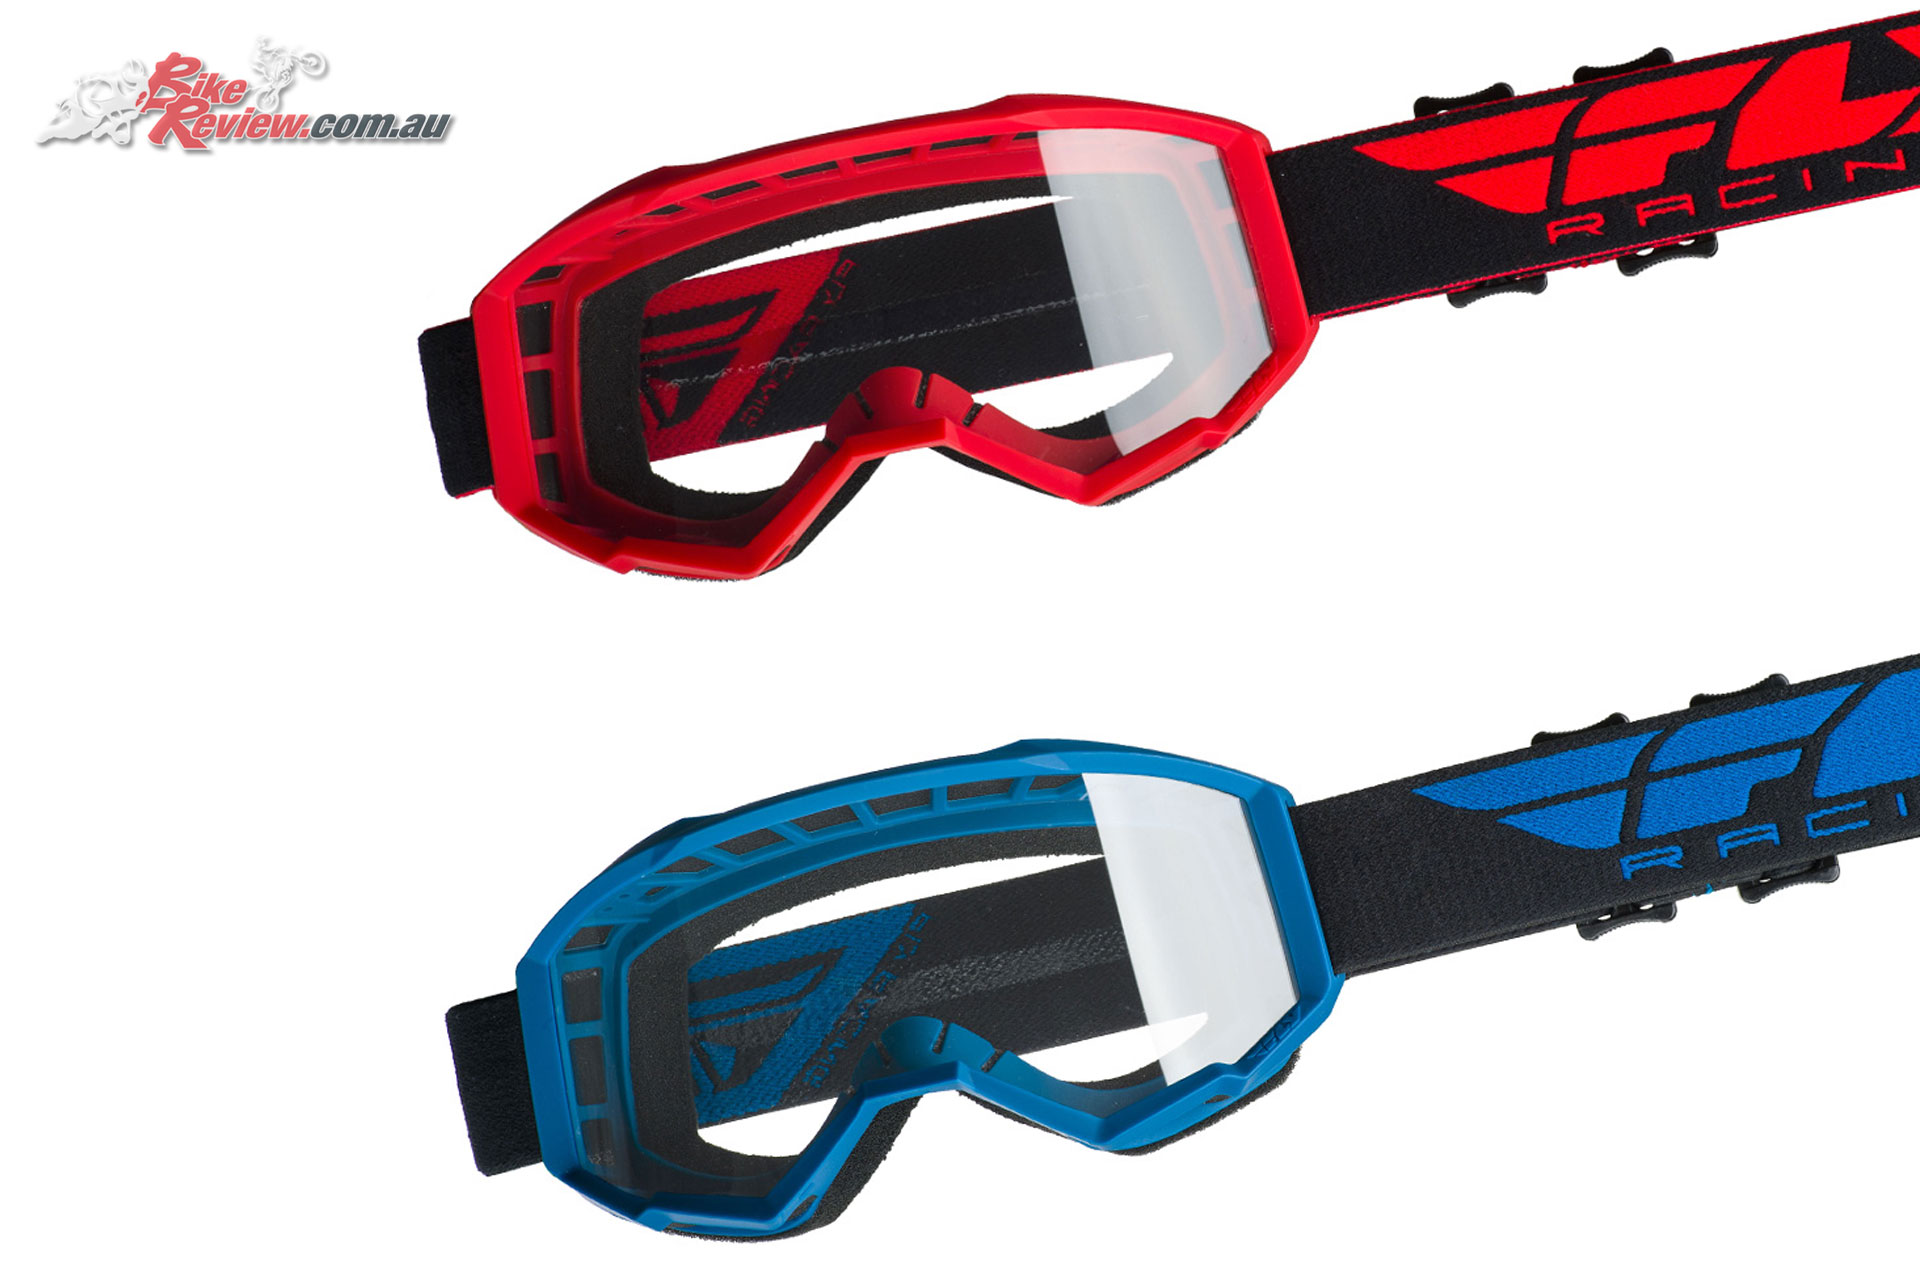 Fly Racing 2019 FOCUS GOGGLE